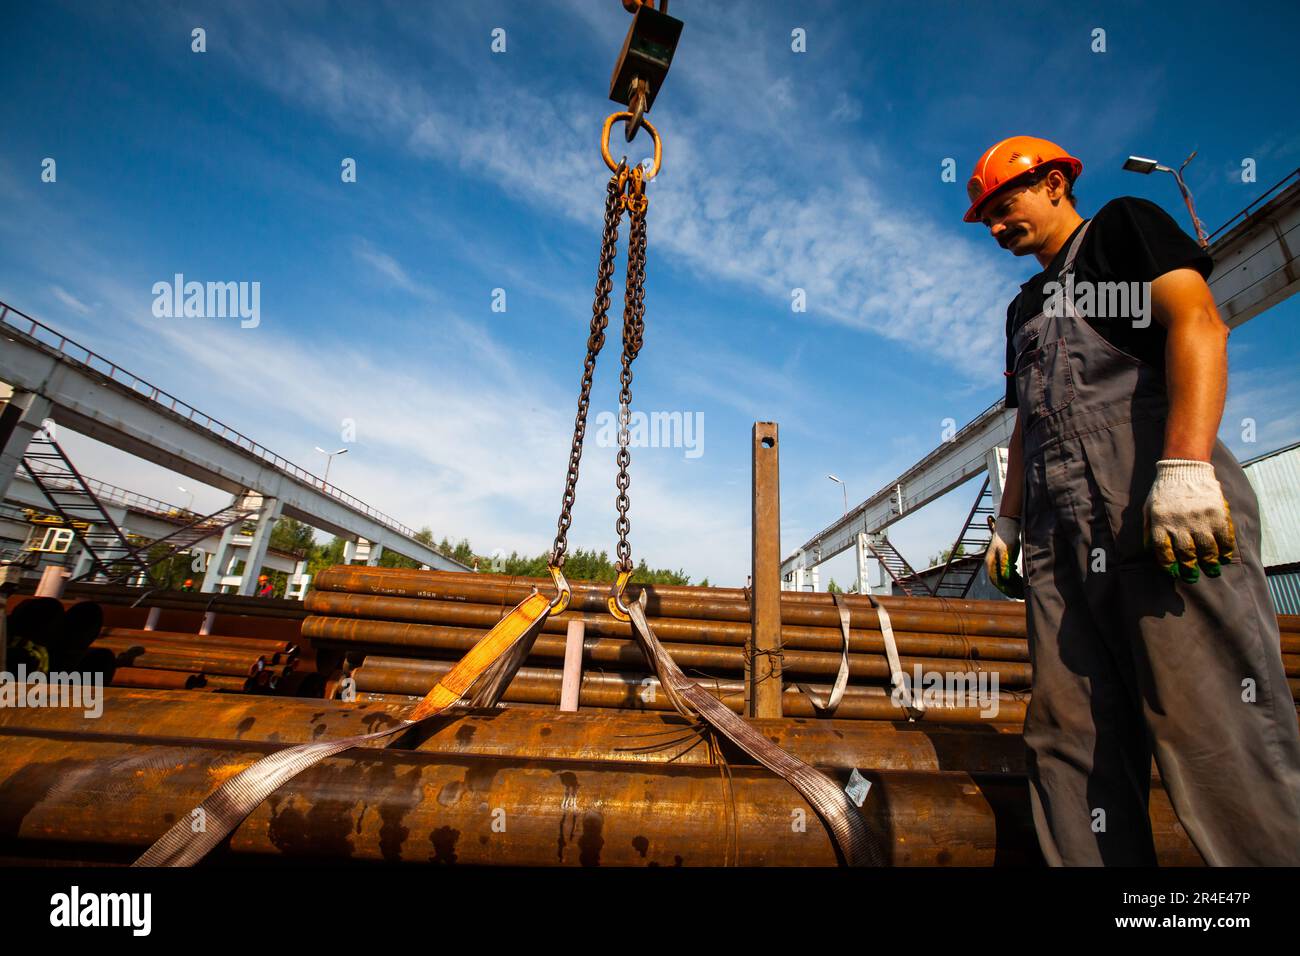 Podolsk, Moscow province - August 02, 2021: Pipes warehouse. Worker load pipes with overhead crane. Stock Photo